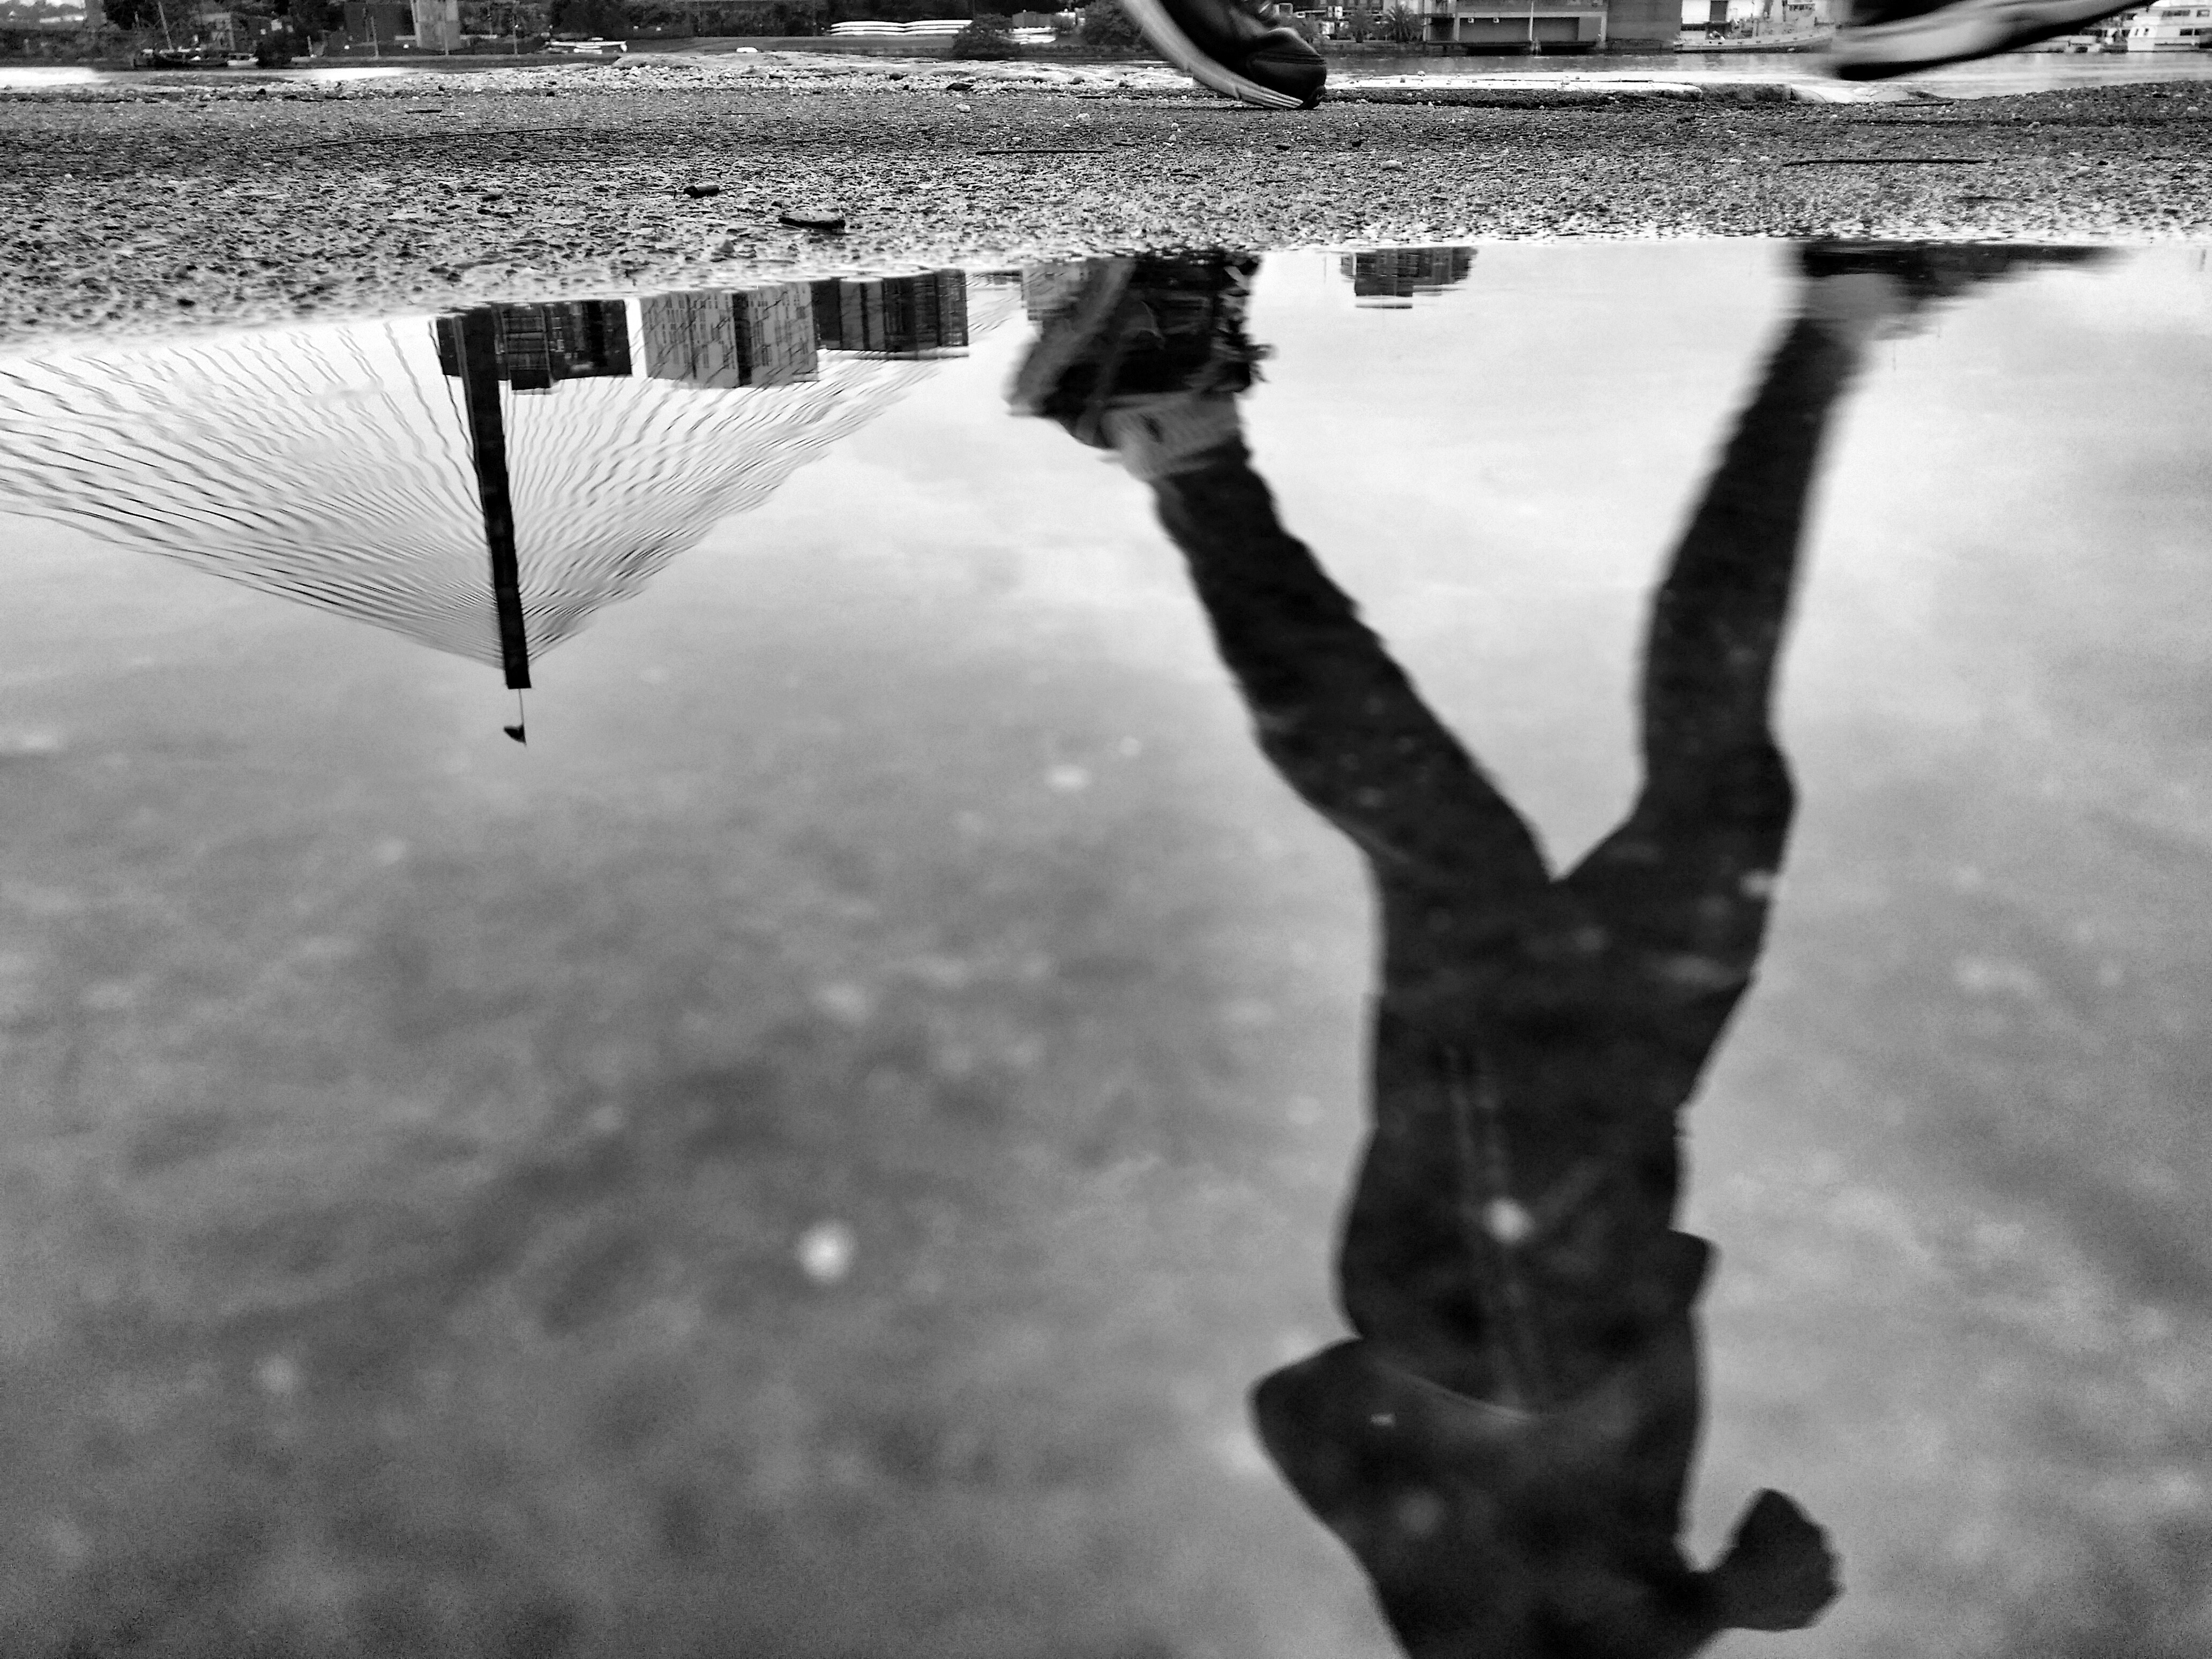 Reflection of a person running